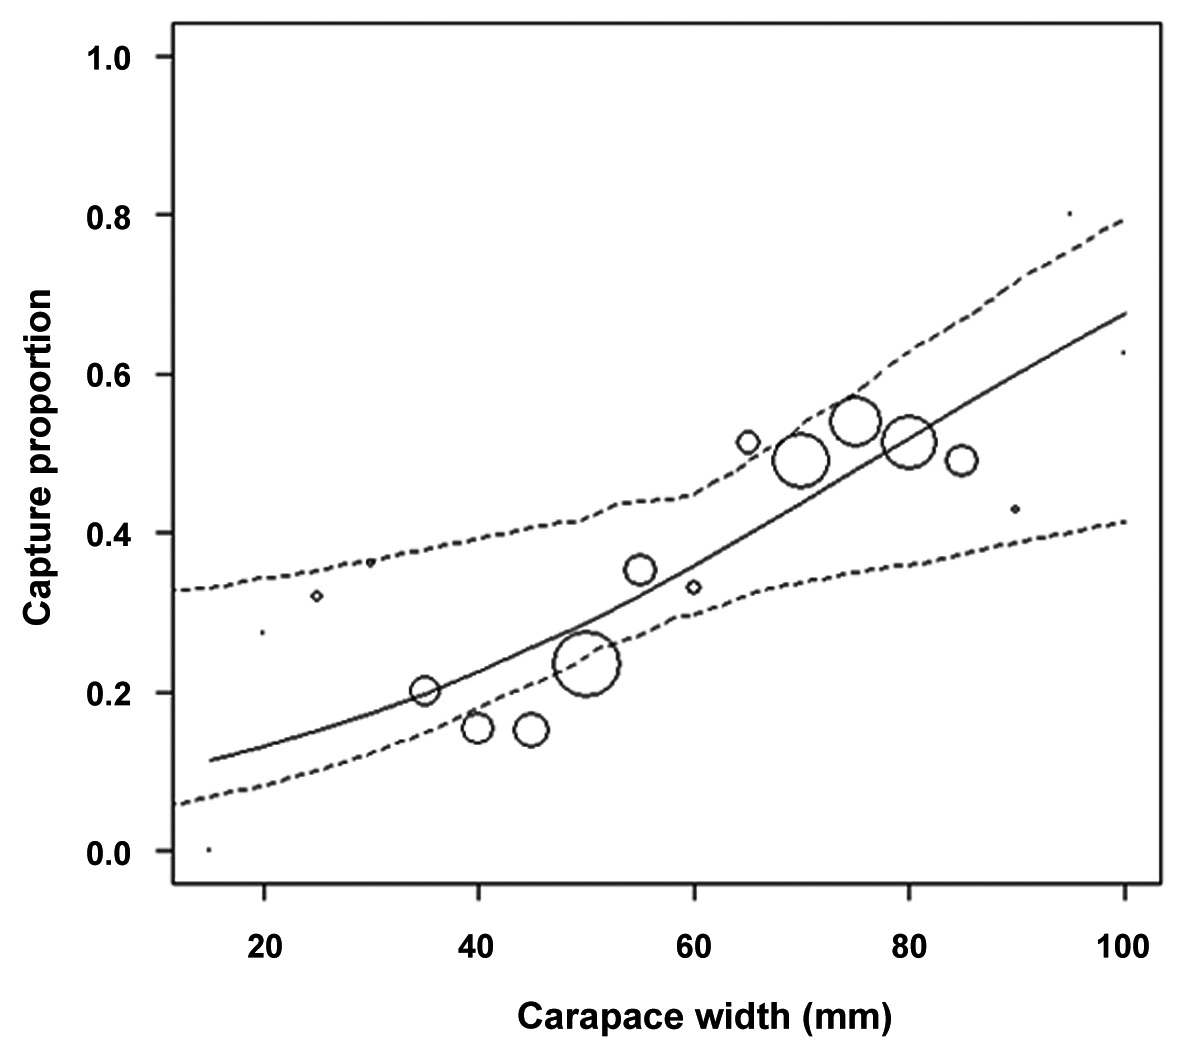 Estimated efficiency of the National Fisheries Research and Development Institute (NFRDI) survey trawl for both sexes of snow crab as a function of carapace width. The dotted lines represent the 95% empirical confidence intervals. The circles represent the relative sample size within 5 mm intervals of carapace width.